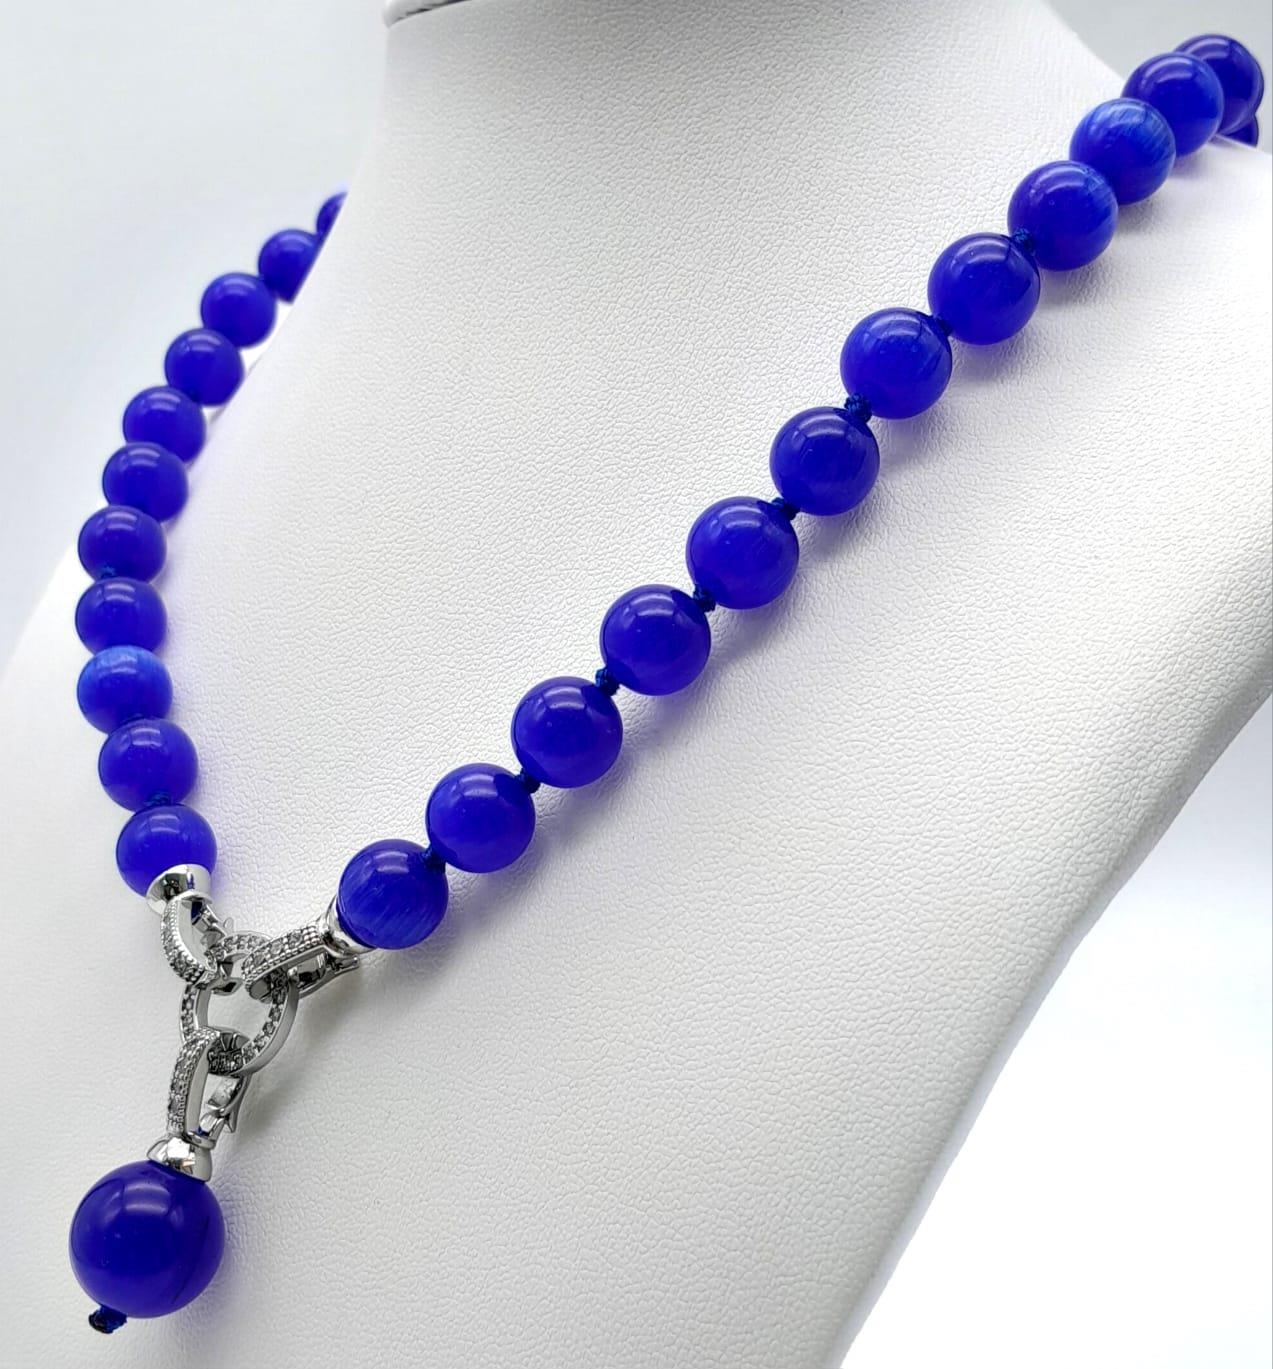 A Blue Cats Eye Bead Necklace with Hanging Pendant. 10mm and 14mm beads. 42cm necklace length. - Image 2 of 4